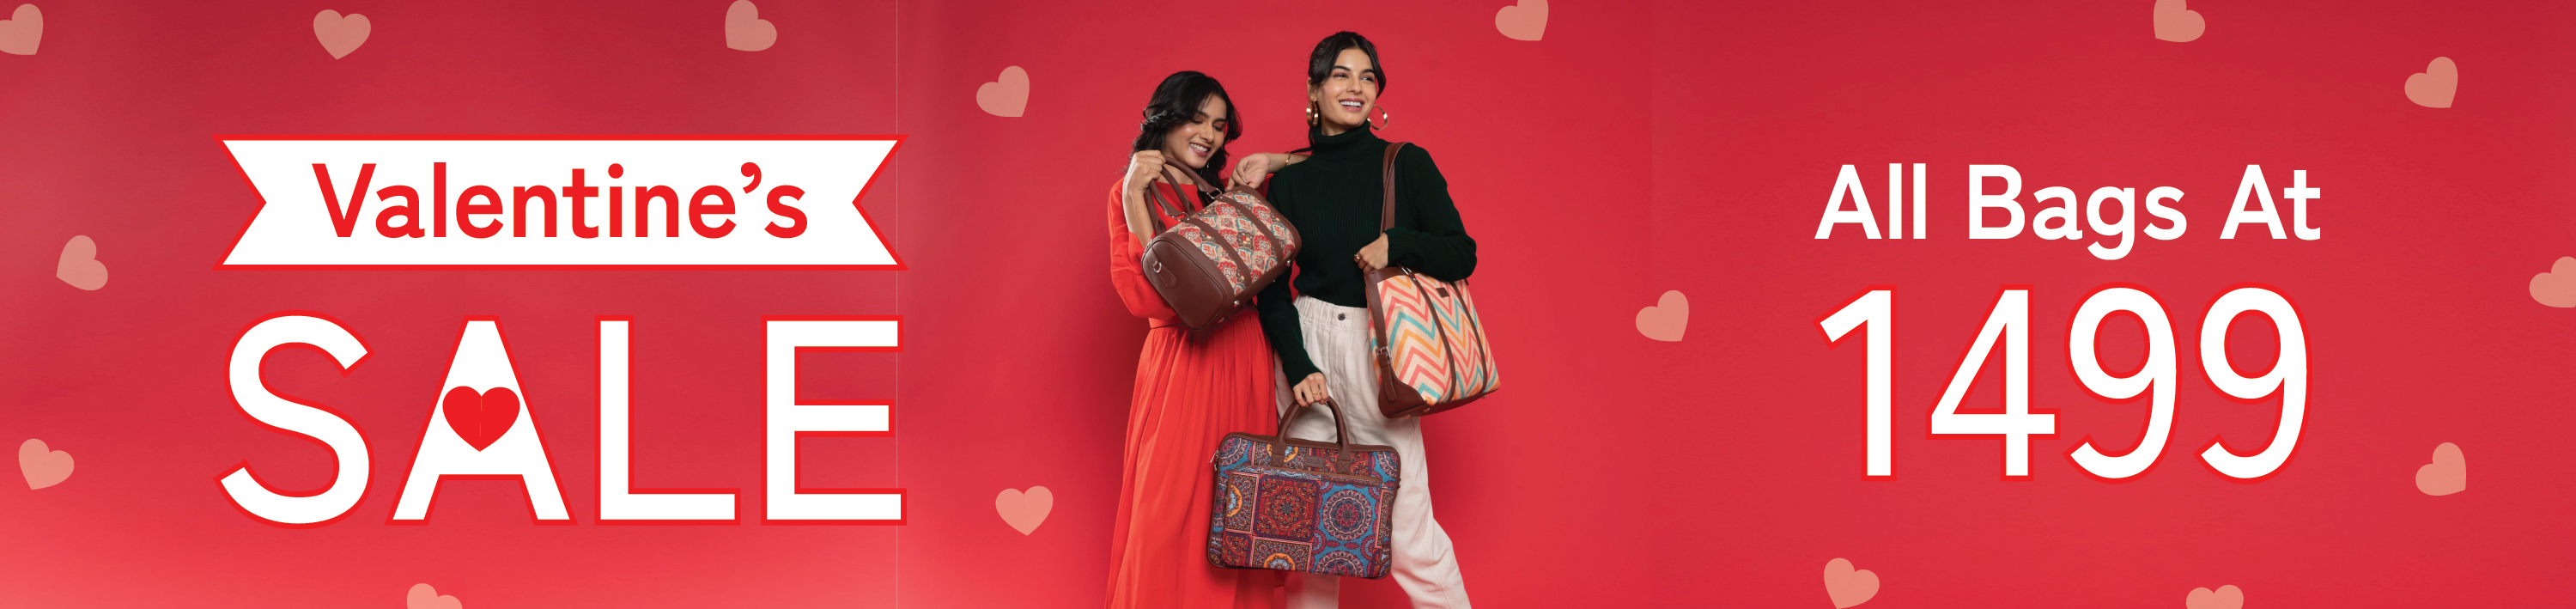 Valentine's Sale All Bags - At 1499